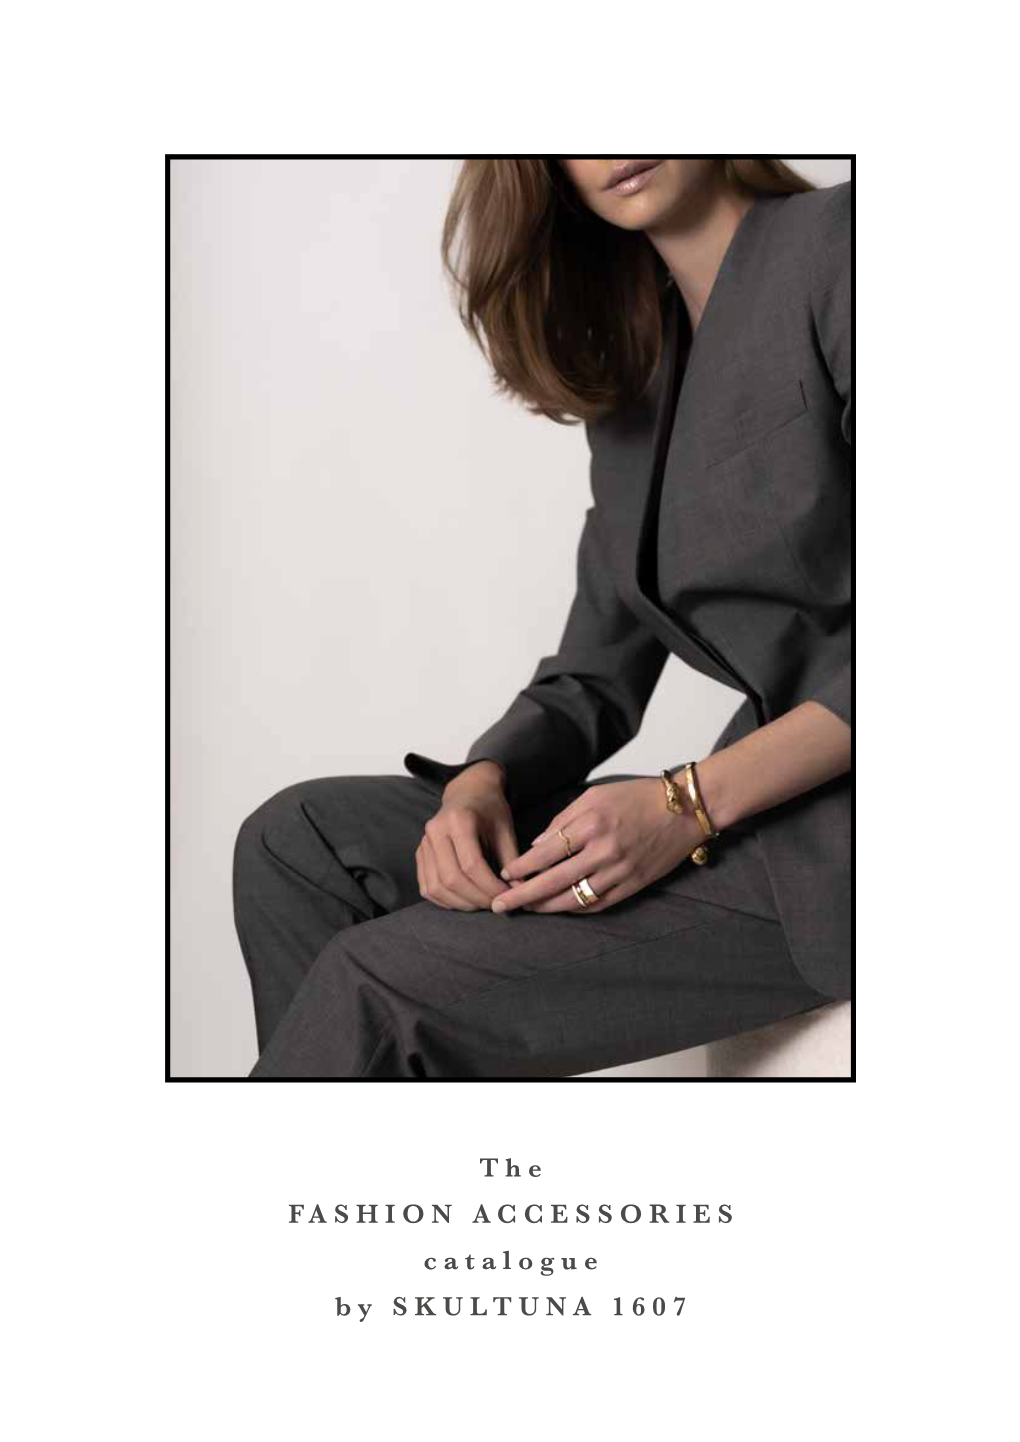 The FASHION ACCESSORIES Catalogue by SKULTUNA 1607 S K U LT U N a 1 6 0 7 - the ANCIENT TRADITION the DESIGNERS of MODERNITY